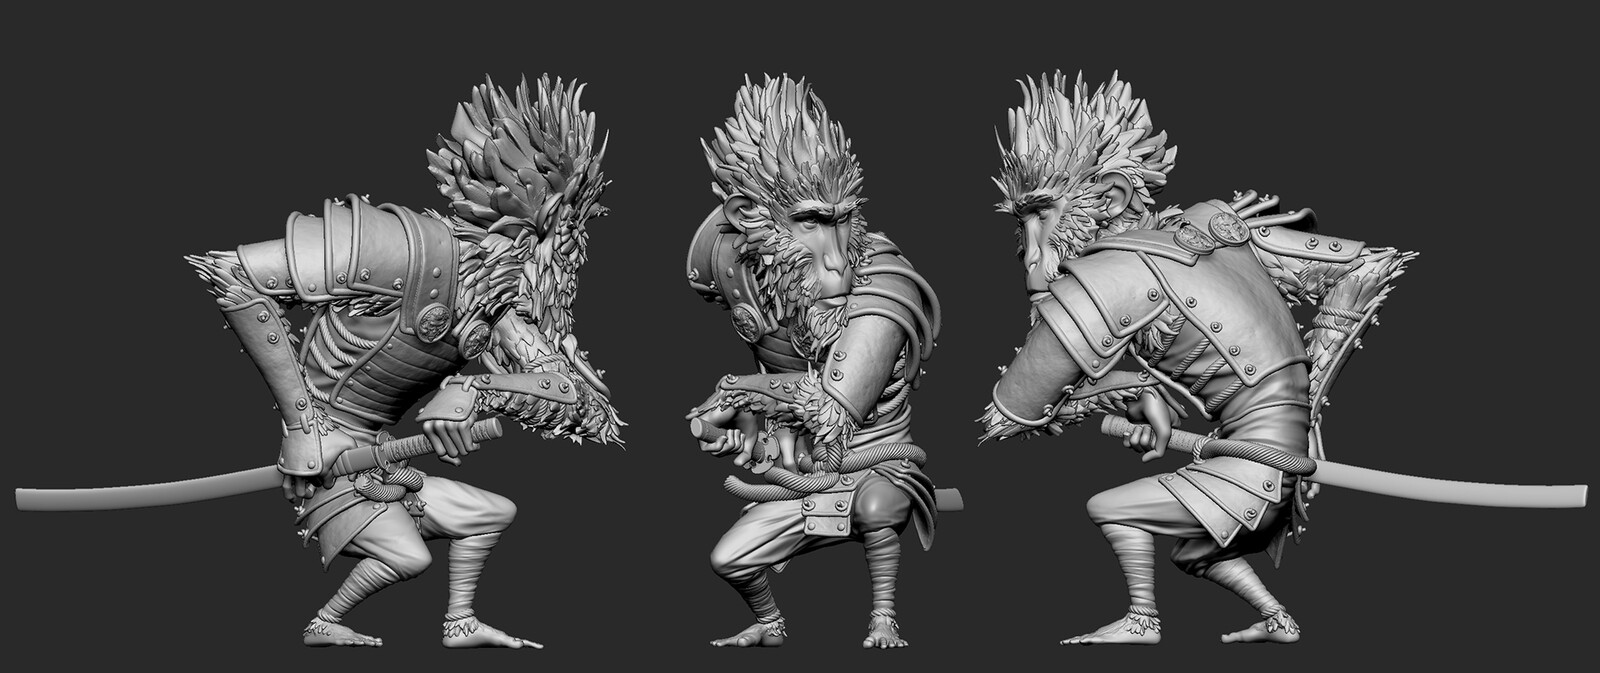 ZBrush Concept